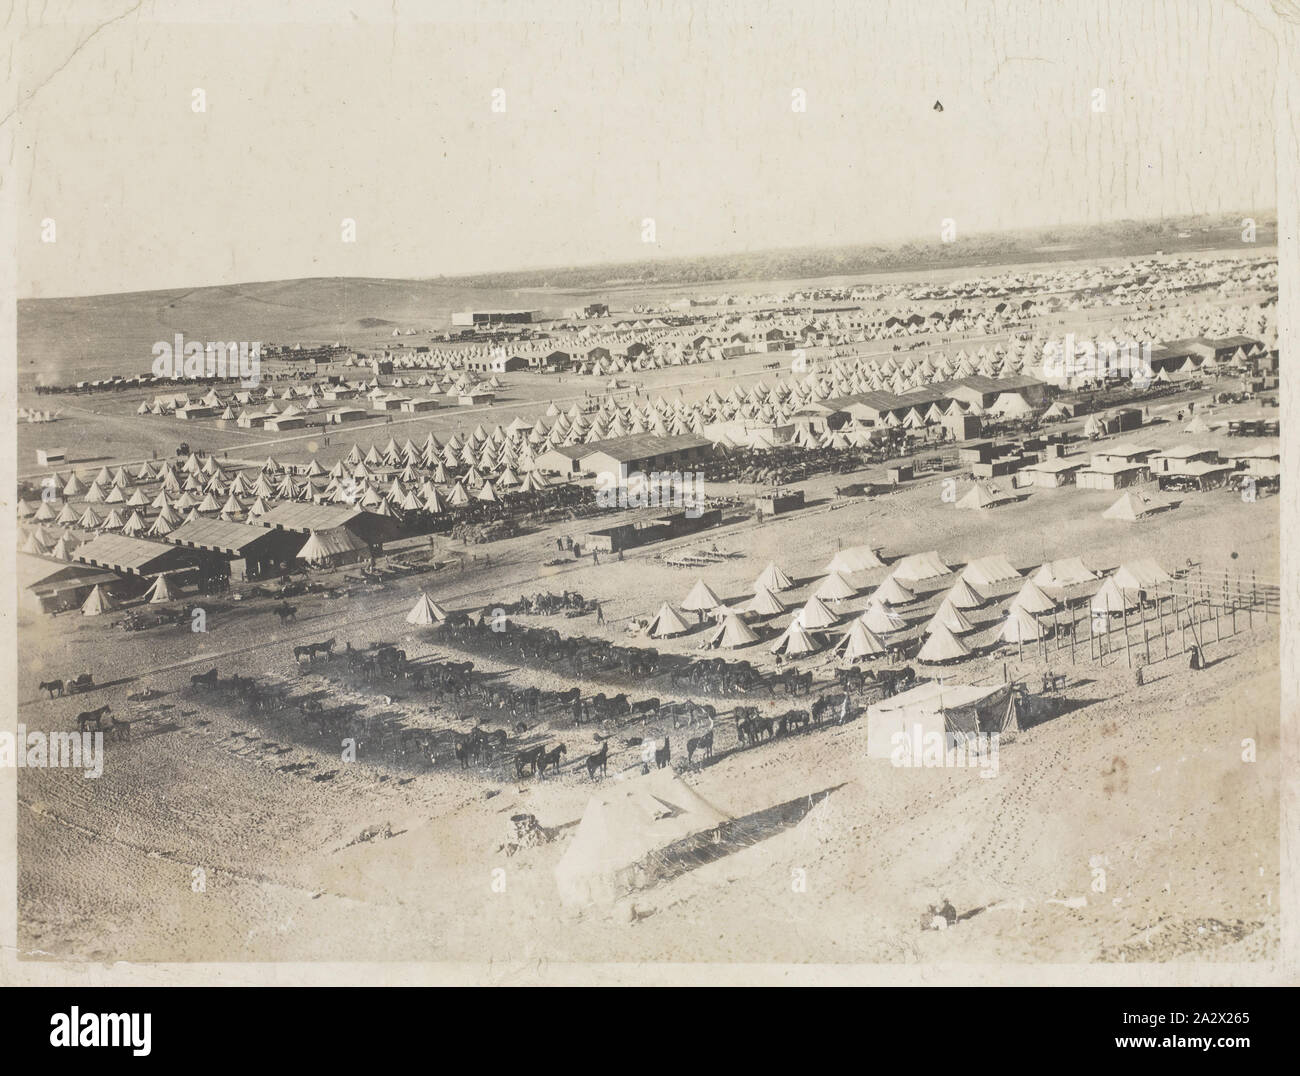 Photograph - 'Australian Camp, Mena', Egypt, Captain Edward Albert McKenna, World War I, 1914-1915, One of 108 images in an album from World War I likely to have been taken by Captain Edward Albert McKenna. The album contains photographs of the 7th Battalion in Egypt. Image of Mena Camp, one of three training camps in Egypt that were used by the A.I.F. and the N.Z.E.F Stock Photo